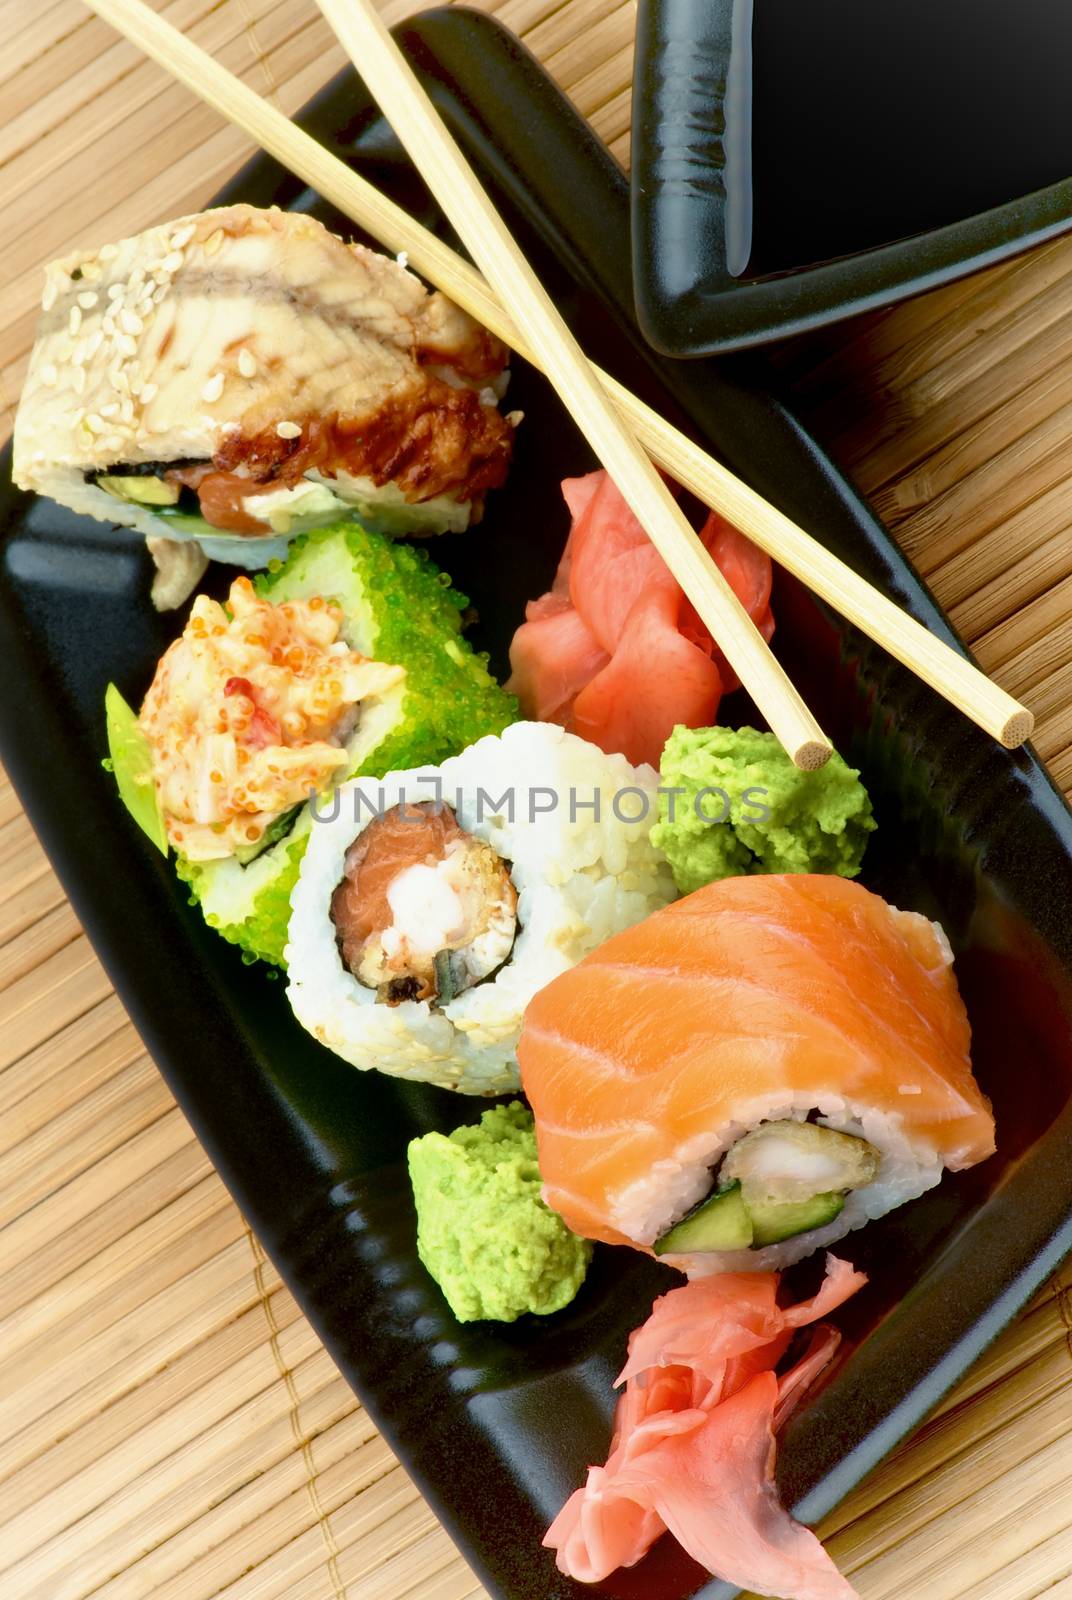 Set of Various Maki Sushi with Salmon, Eel, Green Caviar and Crab on Black Plate with Soy Sauce and Pair of Chopsticks on Straw mat background